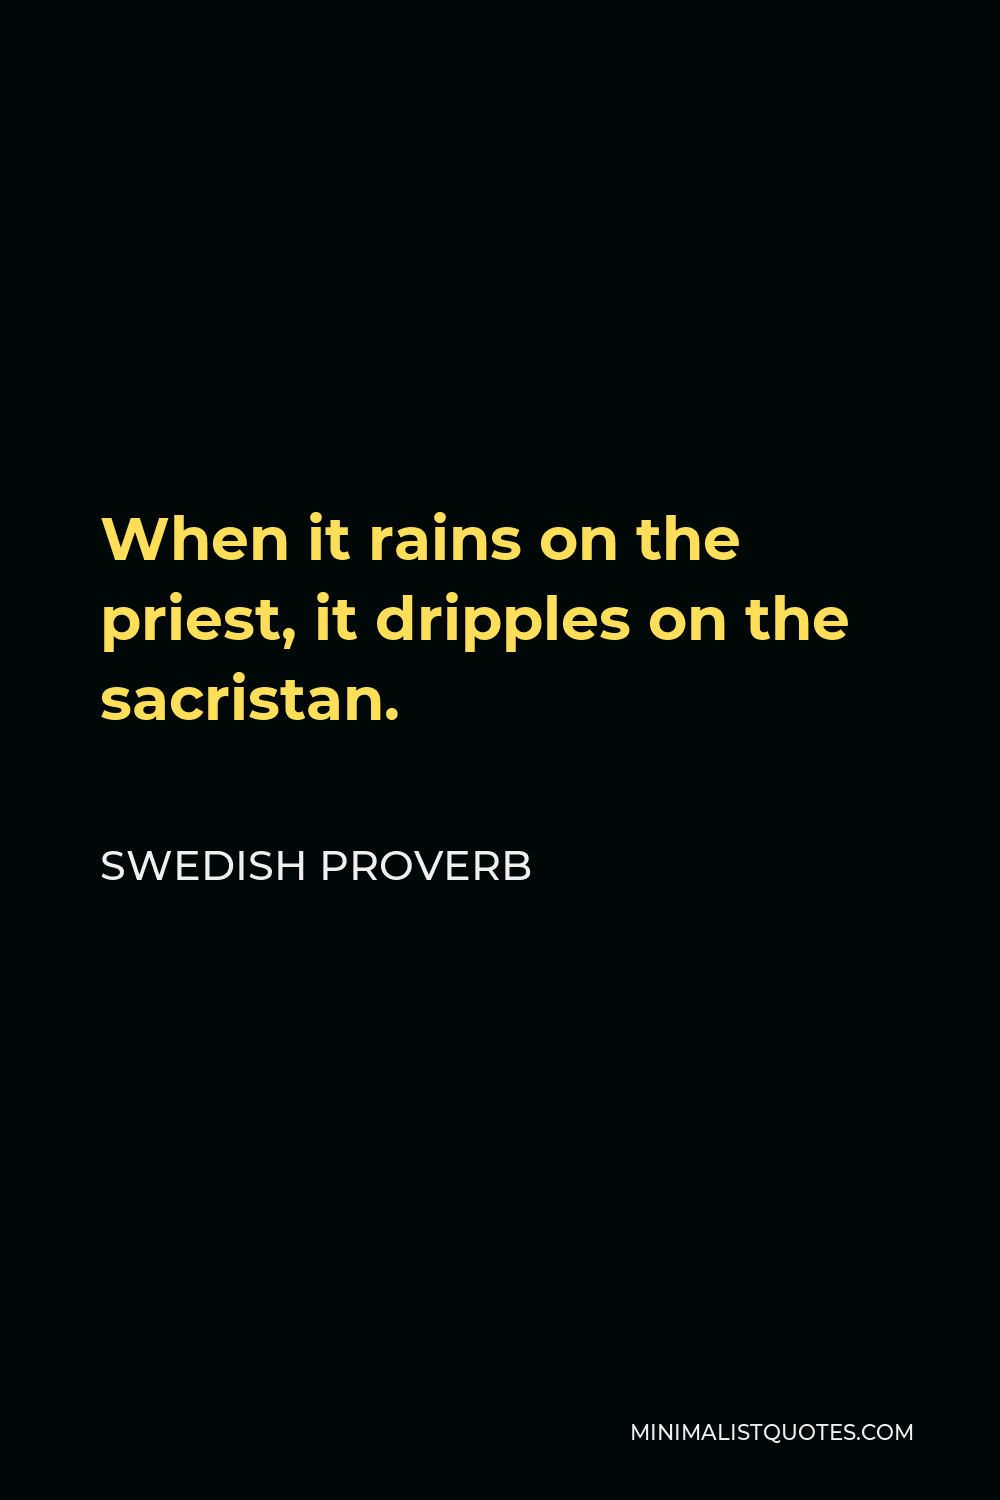 Swedish Proverb Quote - When it rains on the priest, it dripples on the sacristan.